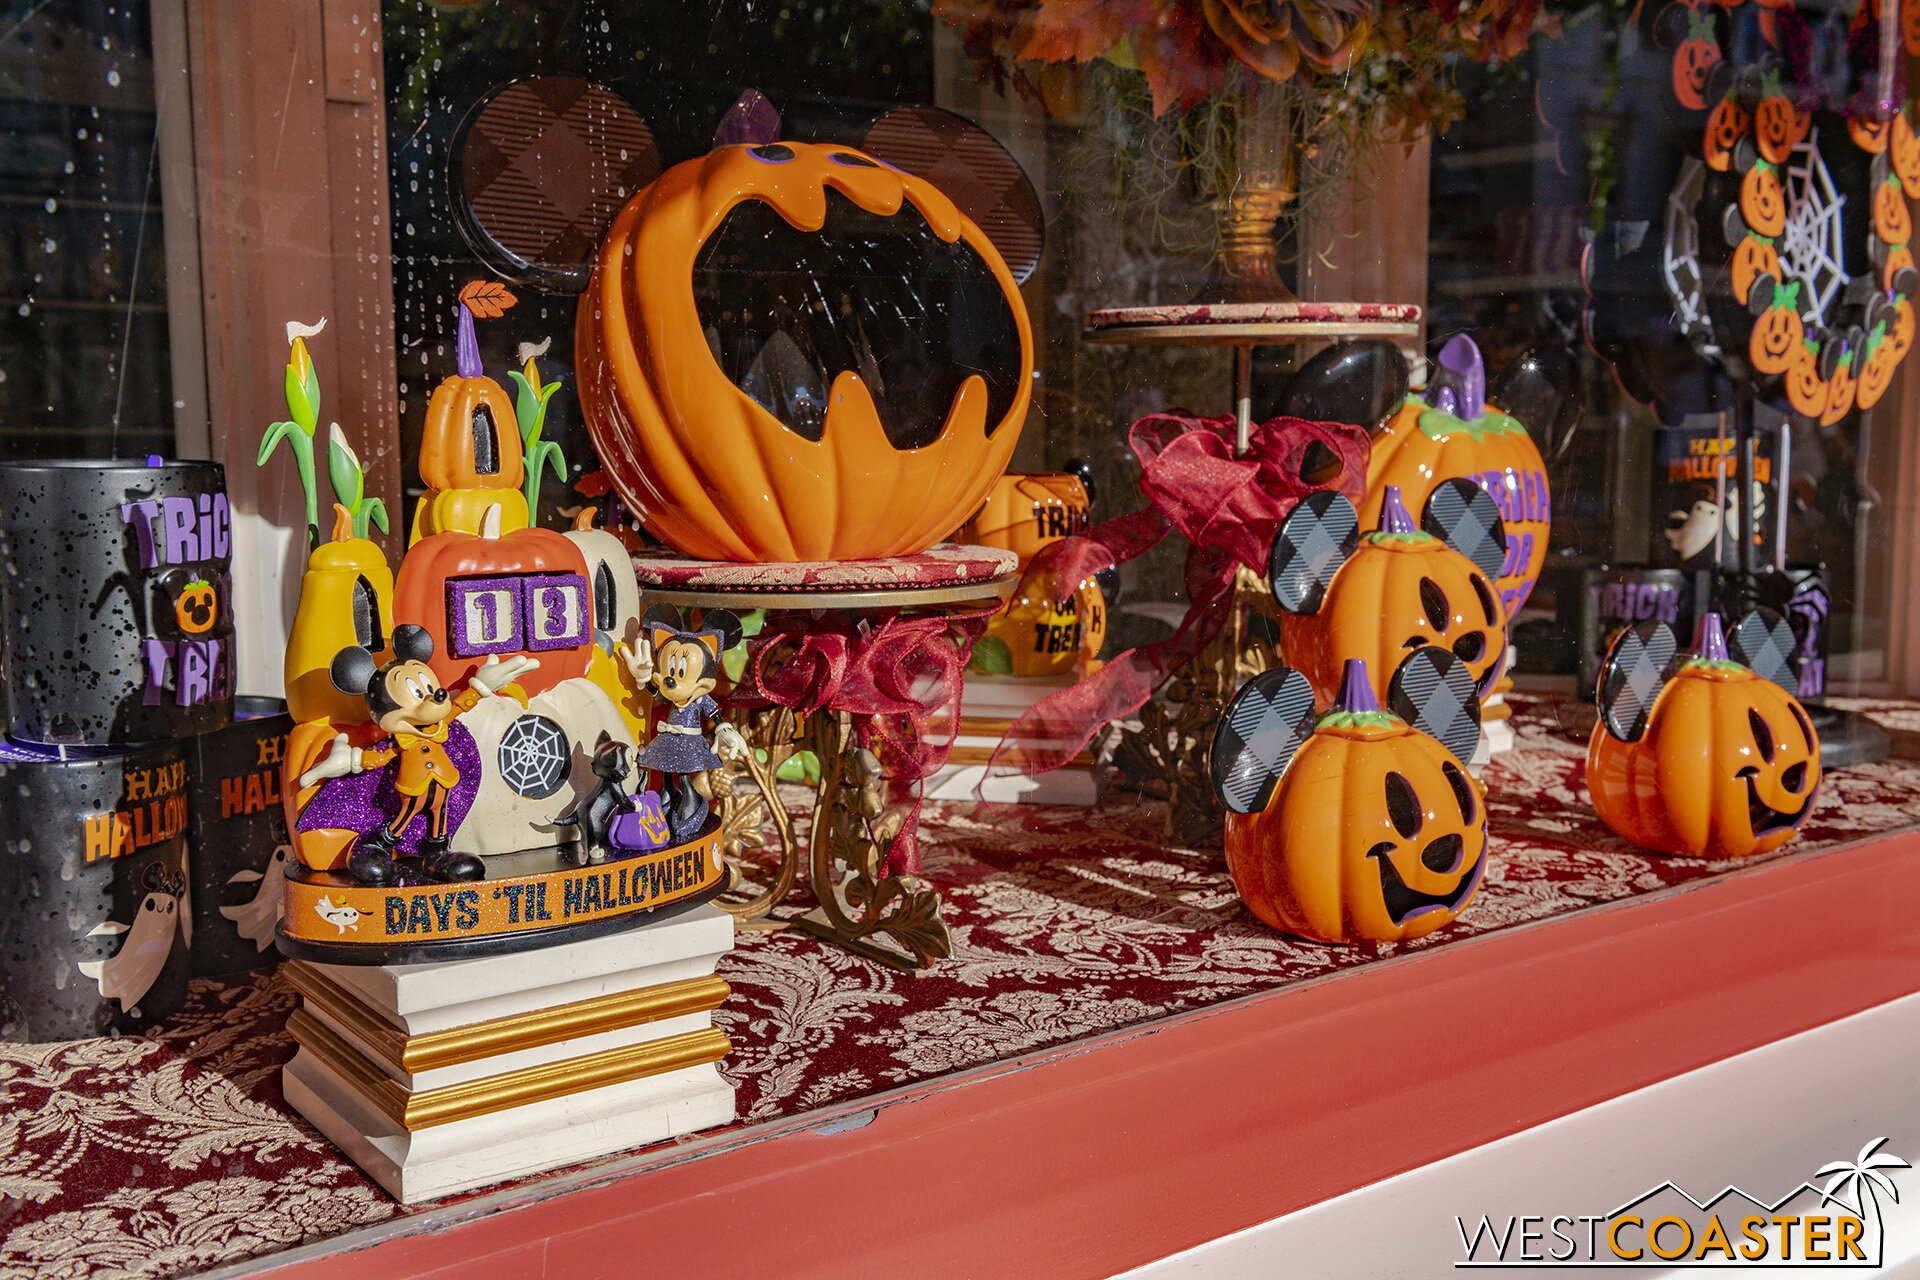  Don’t forget to look at the storefront displays too, since they carry the theme of the season. 